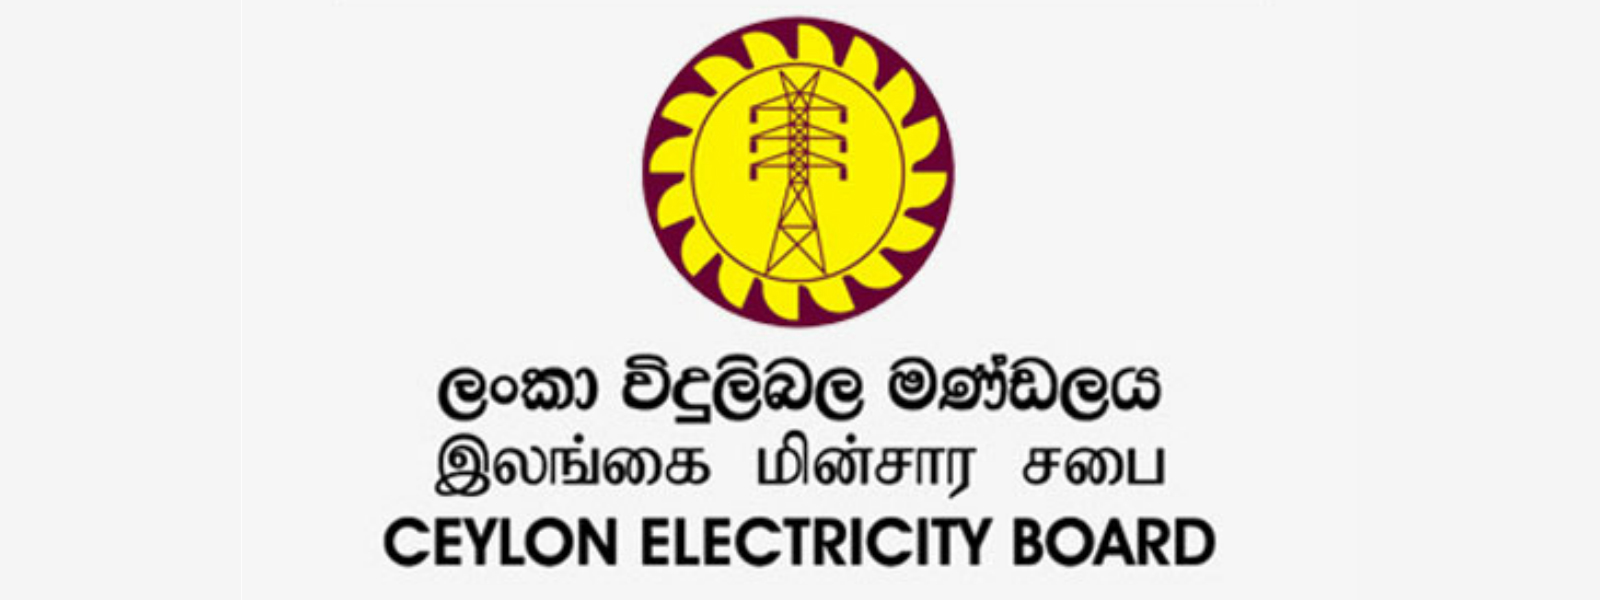 Power requirement in SL grows by 4% annually